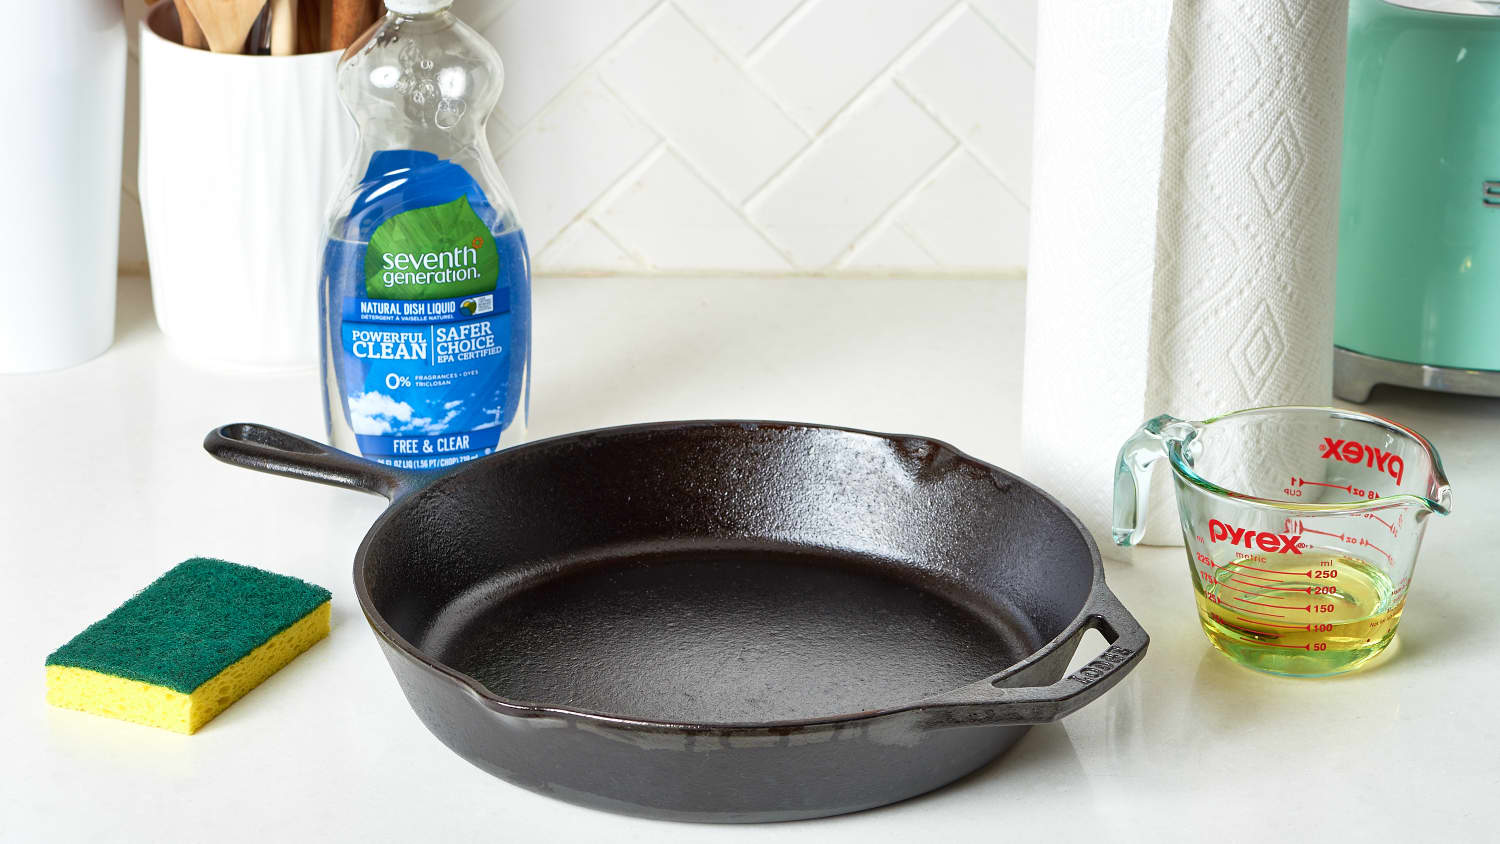 Why Lodge's Cast Iron Skillet is one of the top choices for cooking